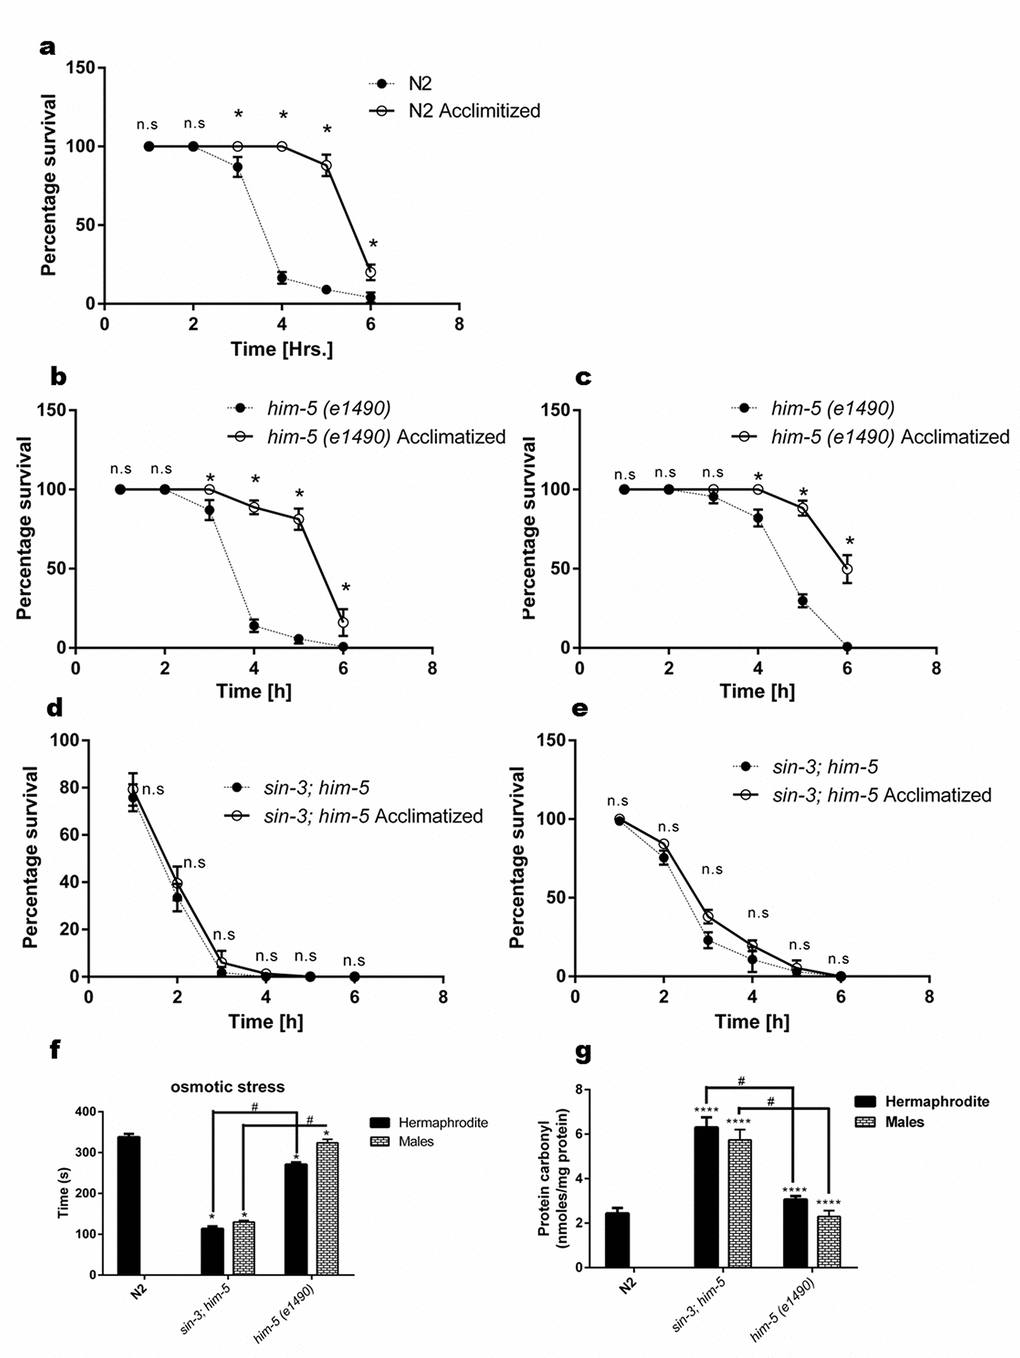 Loss of sin-3 causes decline in percentage survival of worms after thermal stress insult. Percentage survival with and without acclimatization at 25 °C of (a) N2 hermaphrodite (b) him-5(e1490) hermaphrodites and (c) him-5(e1490) males. (d) Loss of sin-3 causes decline in percentage survival after thermal stress insult in both hermaphrodites and (e) males (ns, non-significant; * p  0.05; Student’s t test was performed). (f) Loss of sin-3 causes decline in the survival after osmotic stress insults in the strains indicated when tested on NGM plates with 500mM NaCl. (g)sin-3 deletion causes significant protein carbonylation. Hermaphrodite and males of the indicated strains were subjected to quantification of protein carbonyl content (ns, non-significant; *p  0.05; **p  0.001, ****p  0.0001 and denotes the comparison with respect to wild-type N2; Two way ANOVA performed # p 0.001 denotes the comparison between sin-3;him-5 and him-5(e1490) Student’s t test performed).